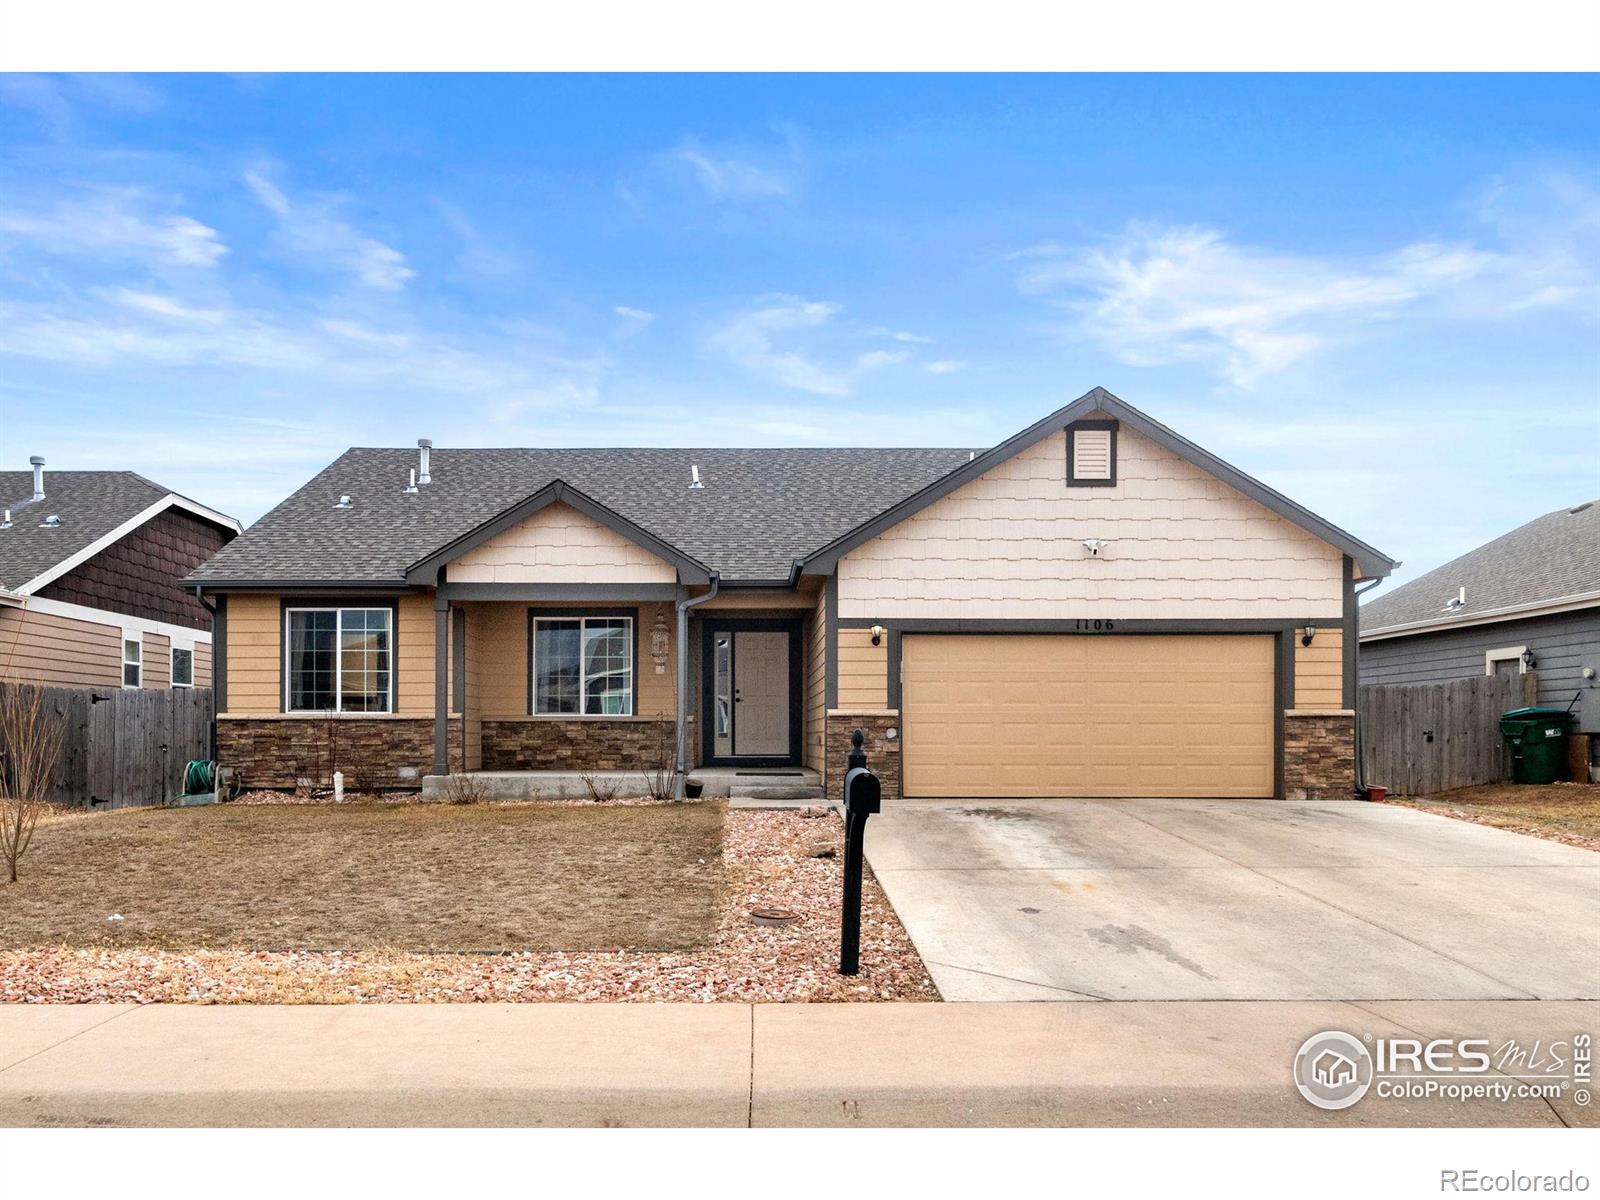 1106 E 25th Street, greeley MLS: 4567891004773 Beds: 5 Baths: 3 Price: $435,000